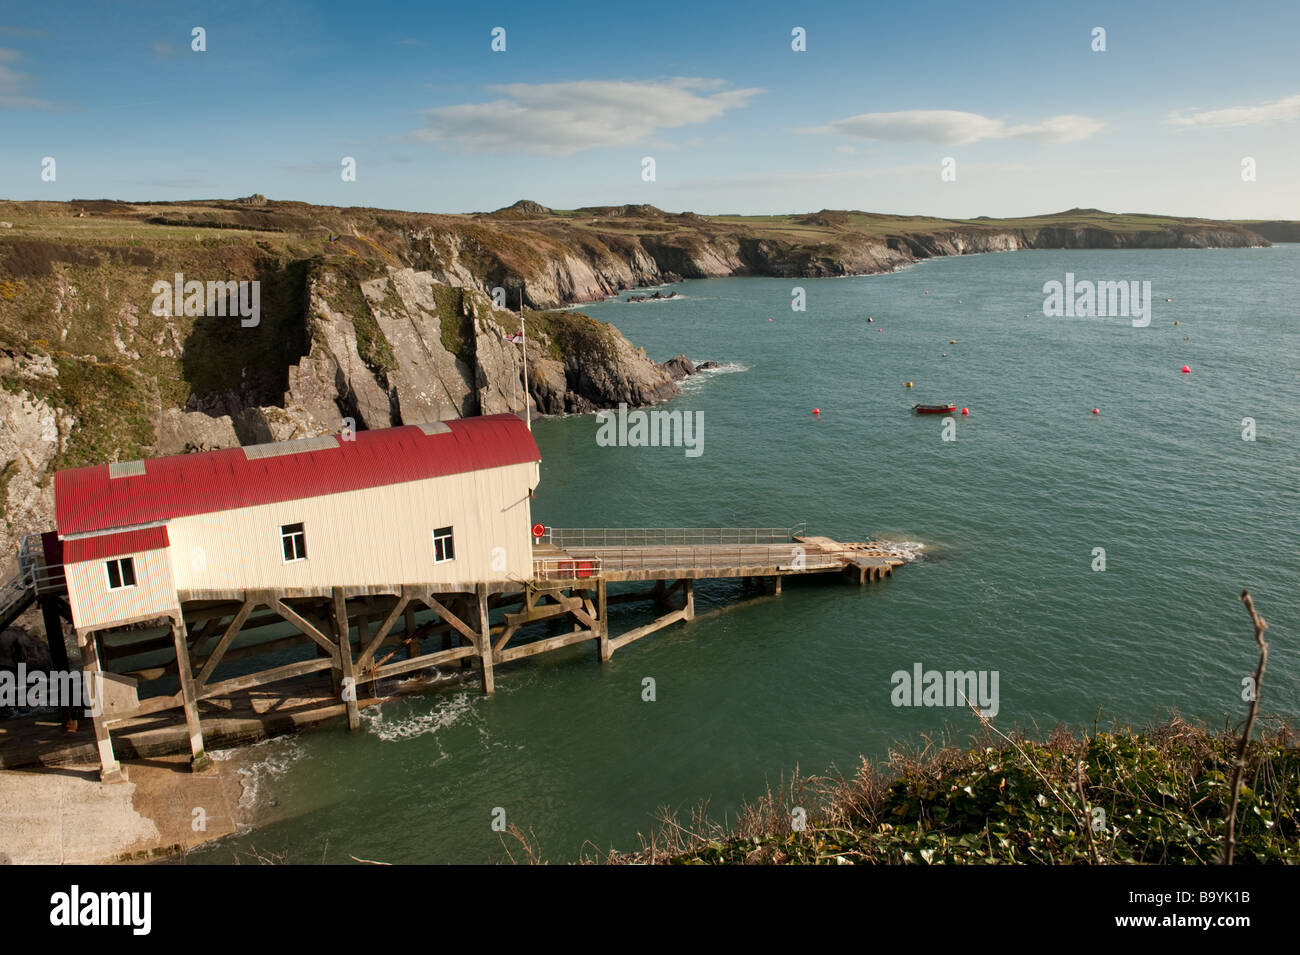 The RNLI lifeboat station at St Justinian's, Pembrokeshire Coast National Park Wales UK, Stock Photo